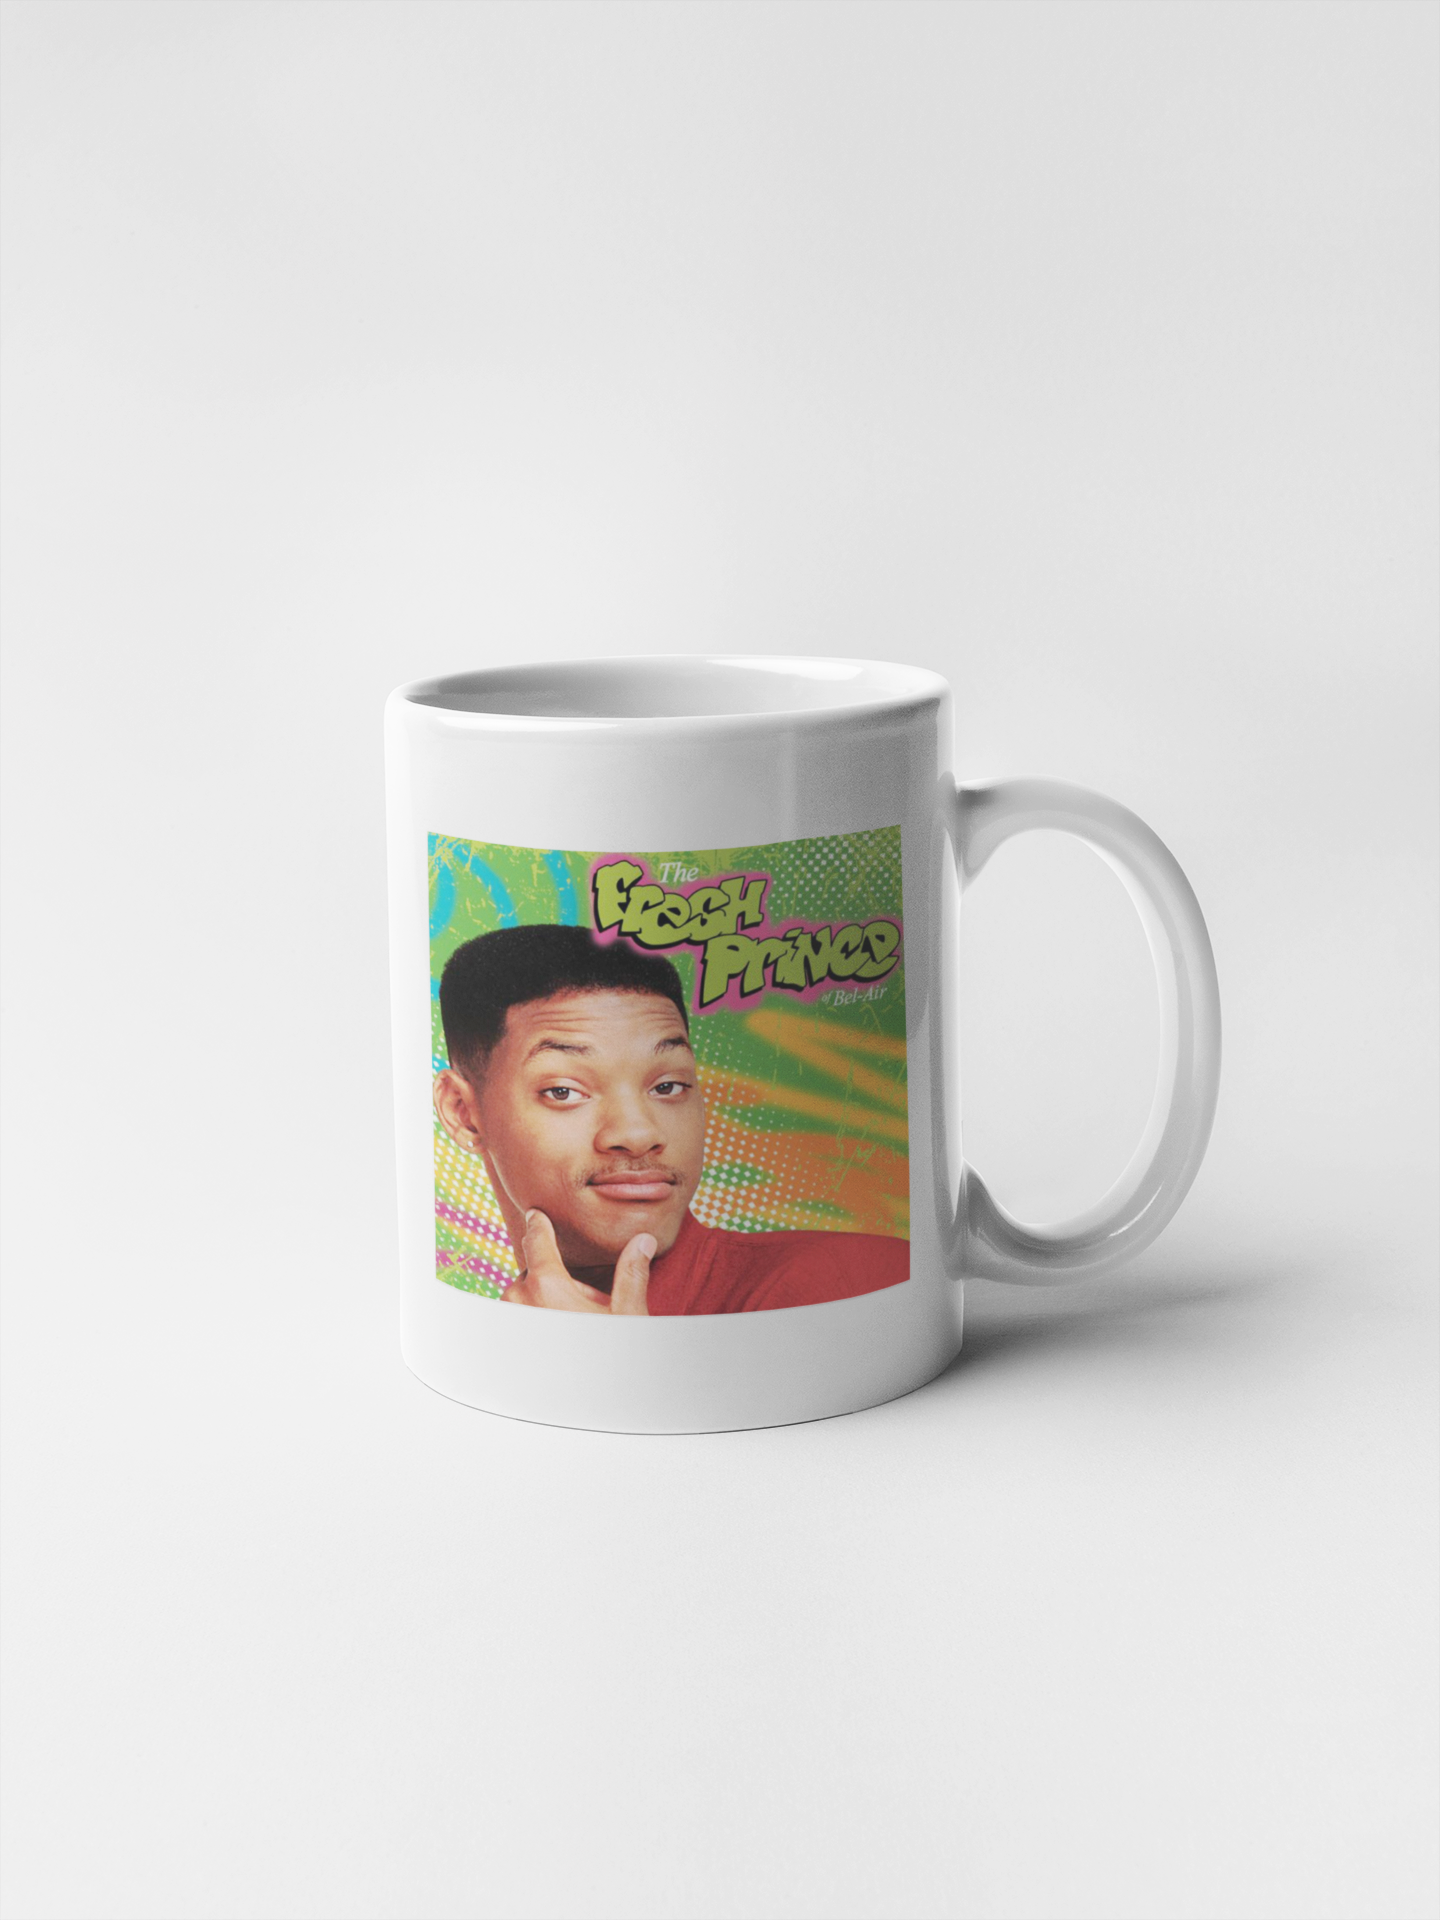 Will Smith The Fresh Prince of Bel Air Ceramic Coffee Mugs